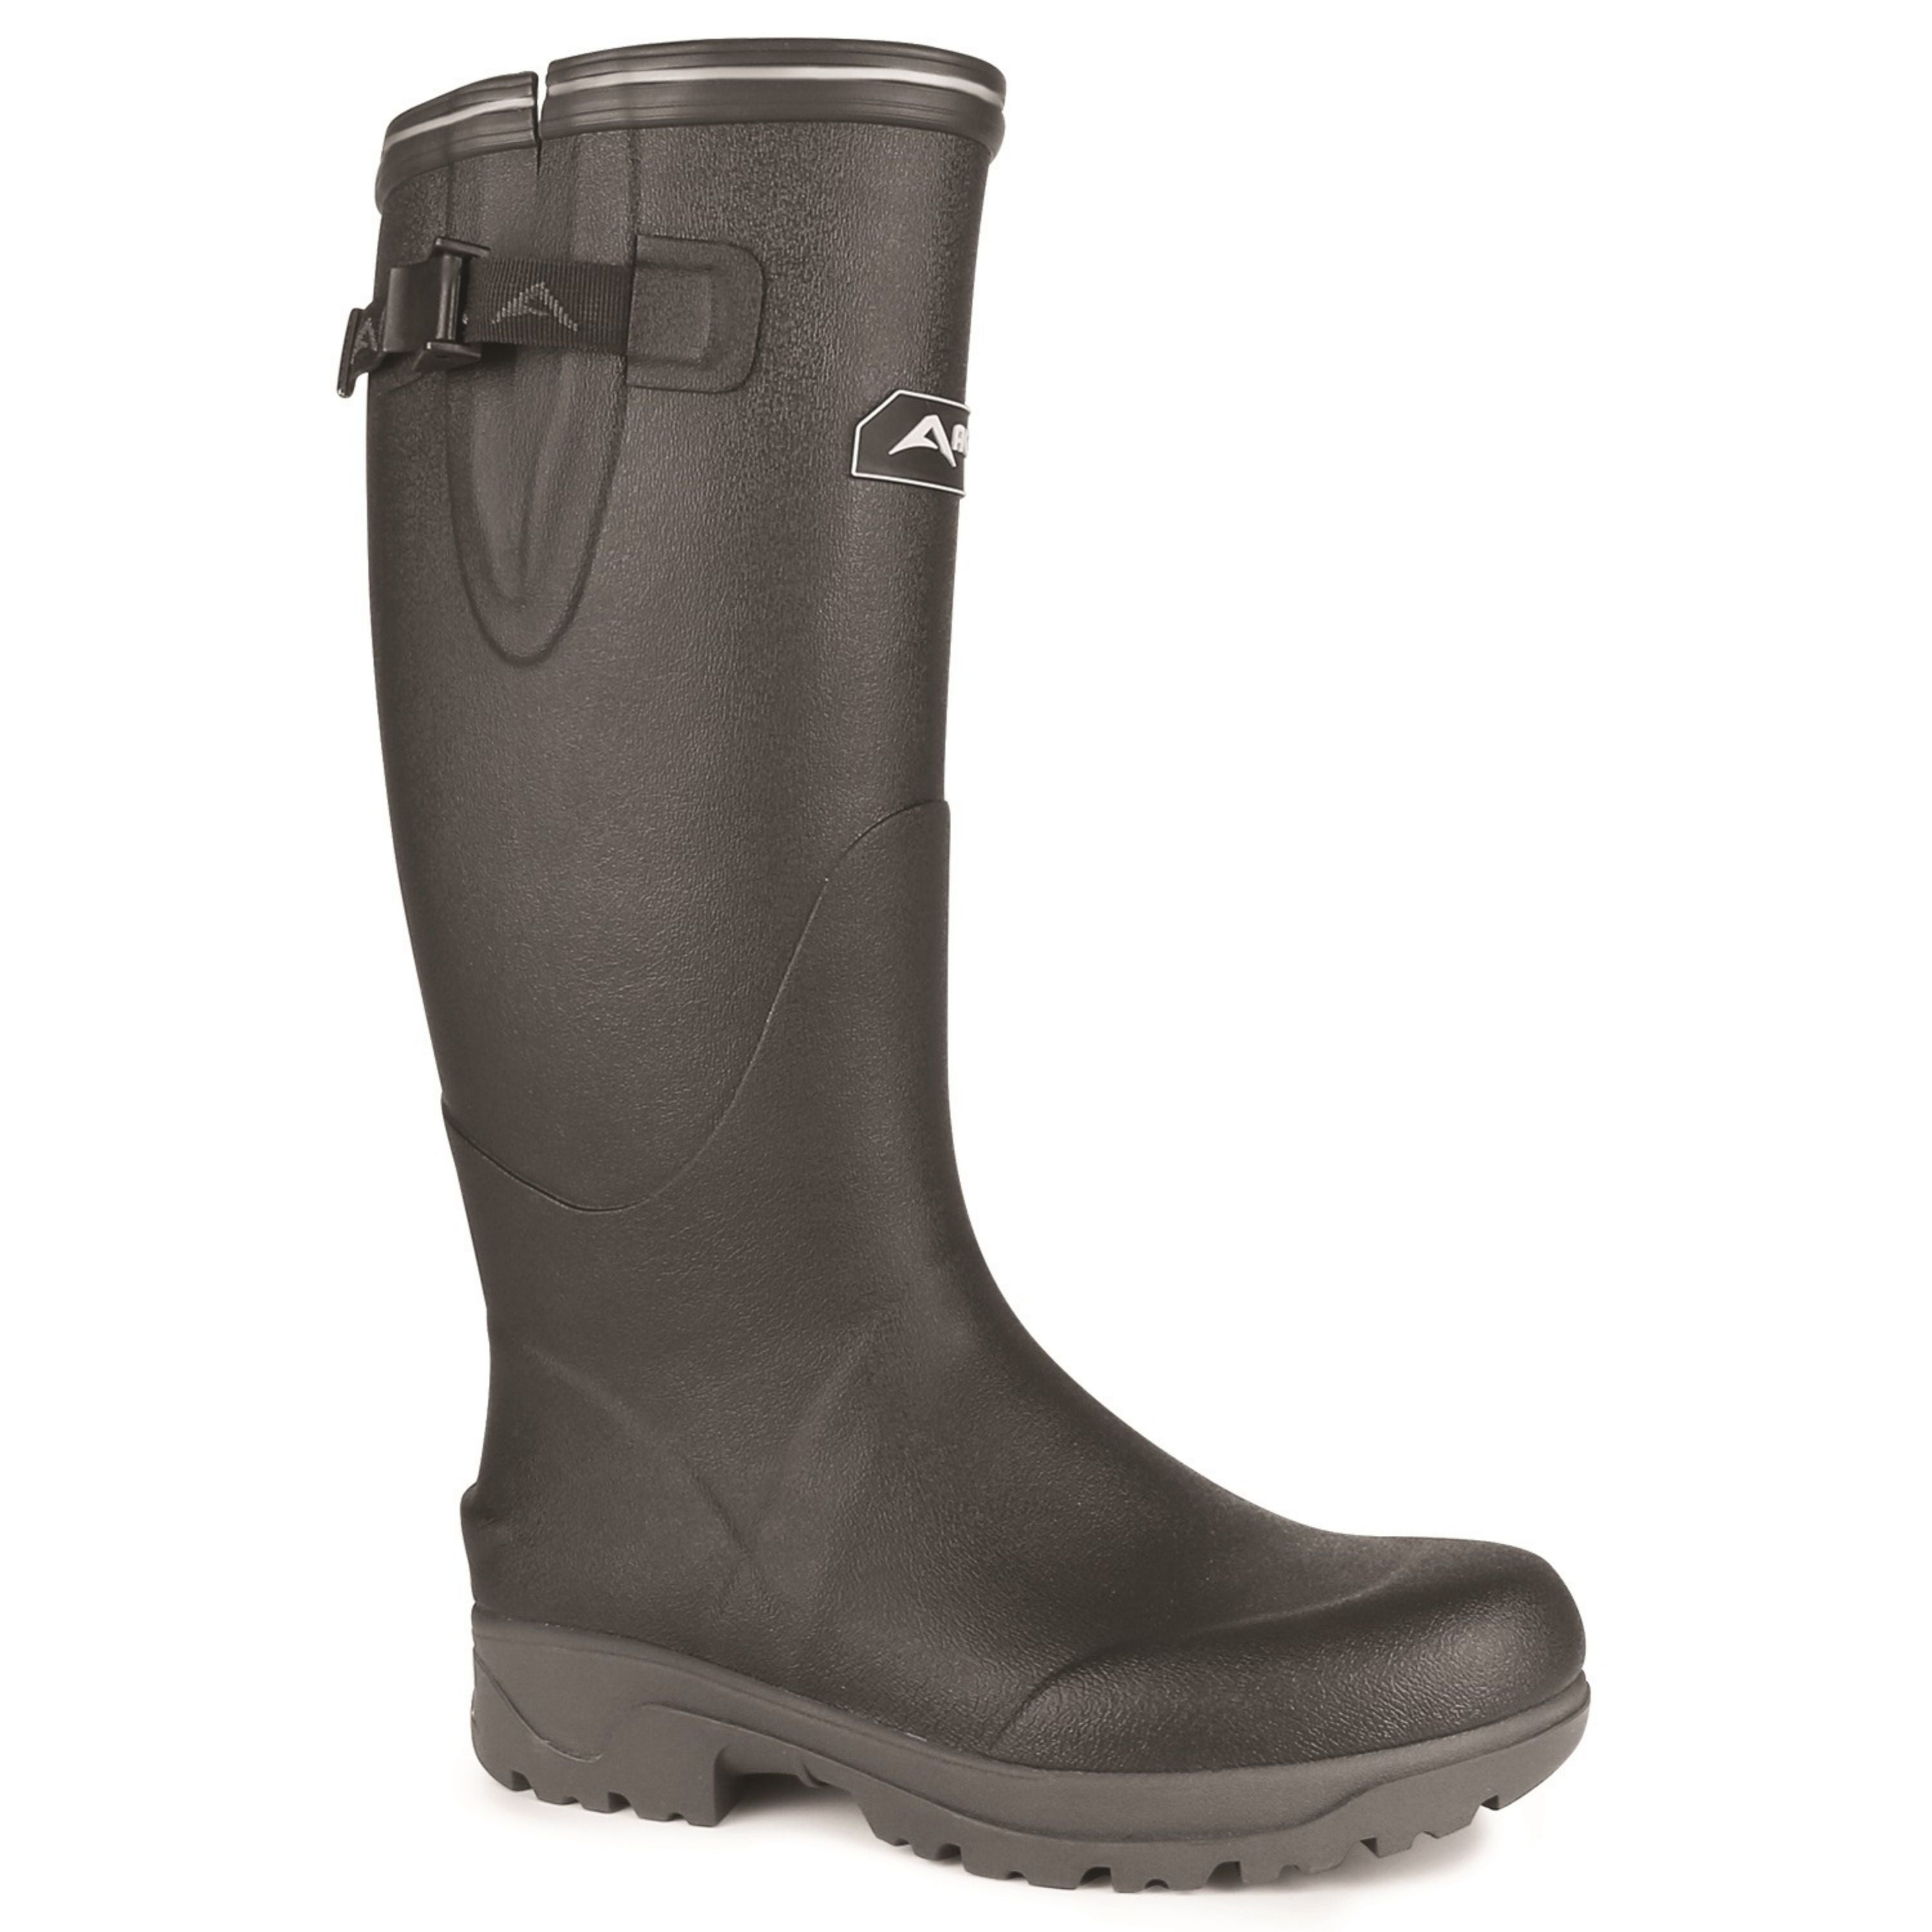 Bottes "Tackle" - Femme||"Tackle" boots - Women's